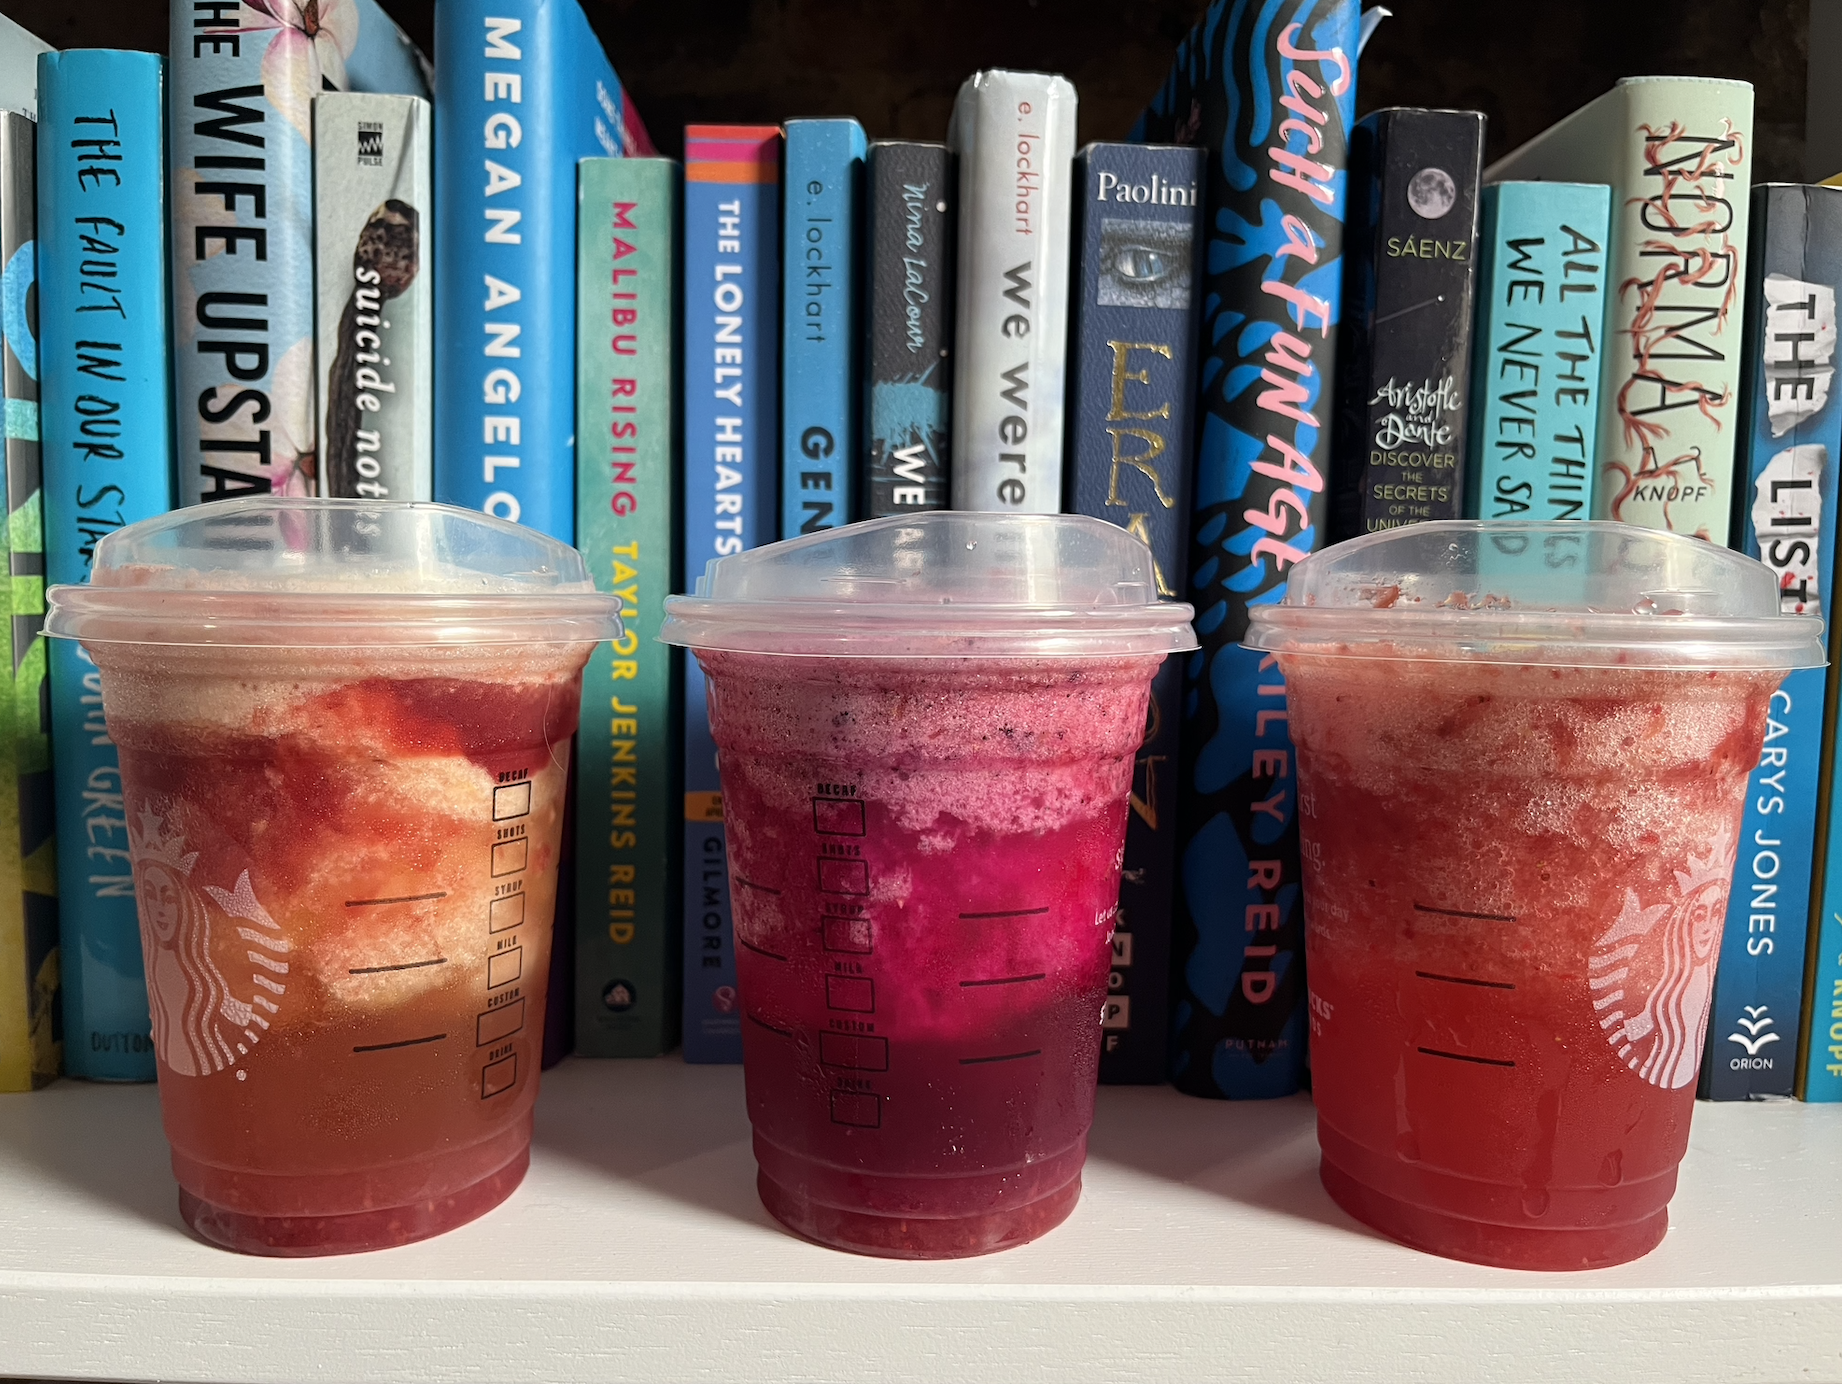 the 3 drinks in front of books